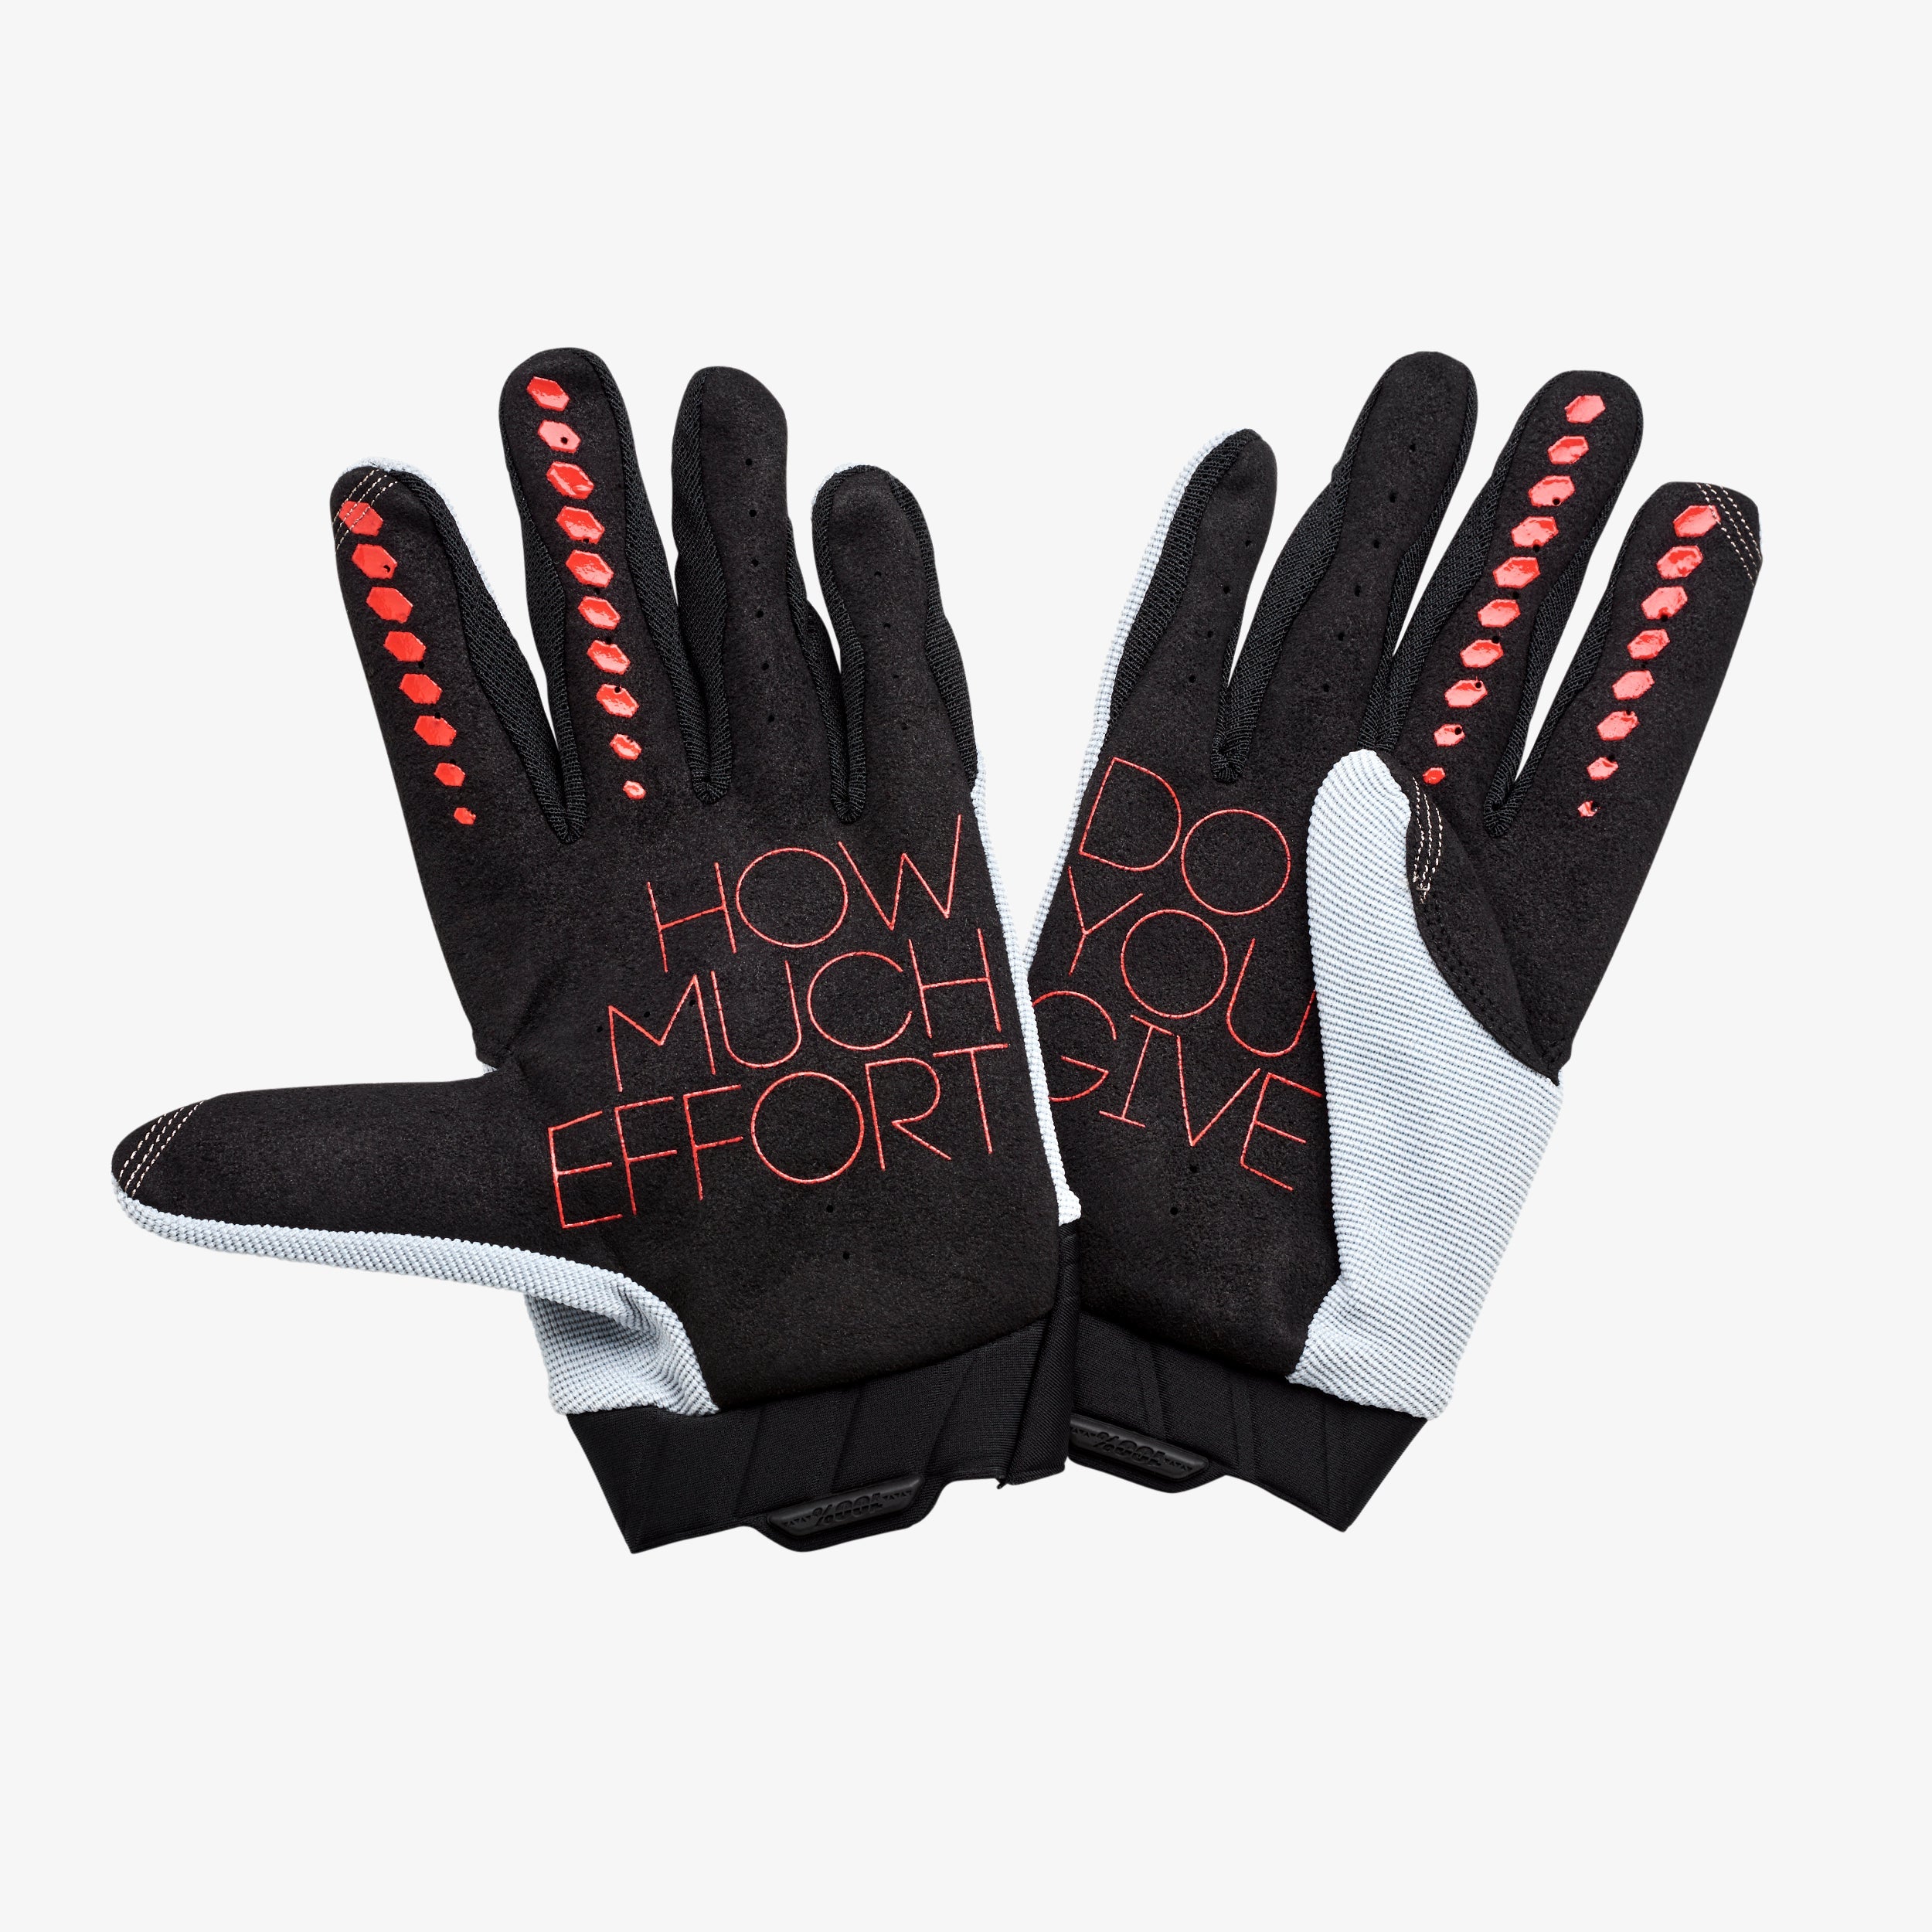 GEOMATIC Gloves Grey/Racer Red MTB